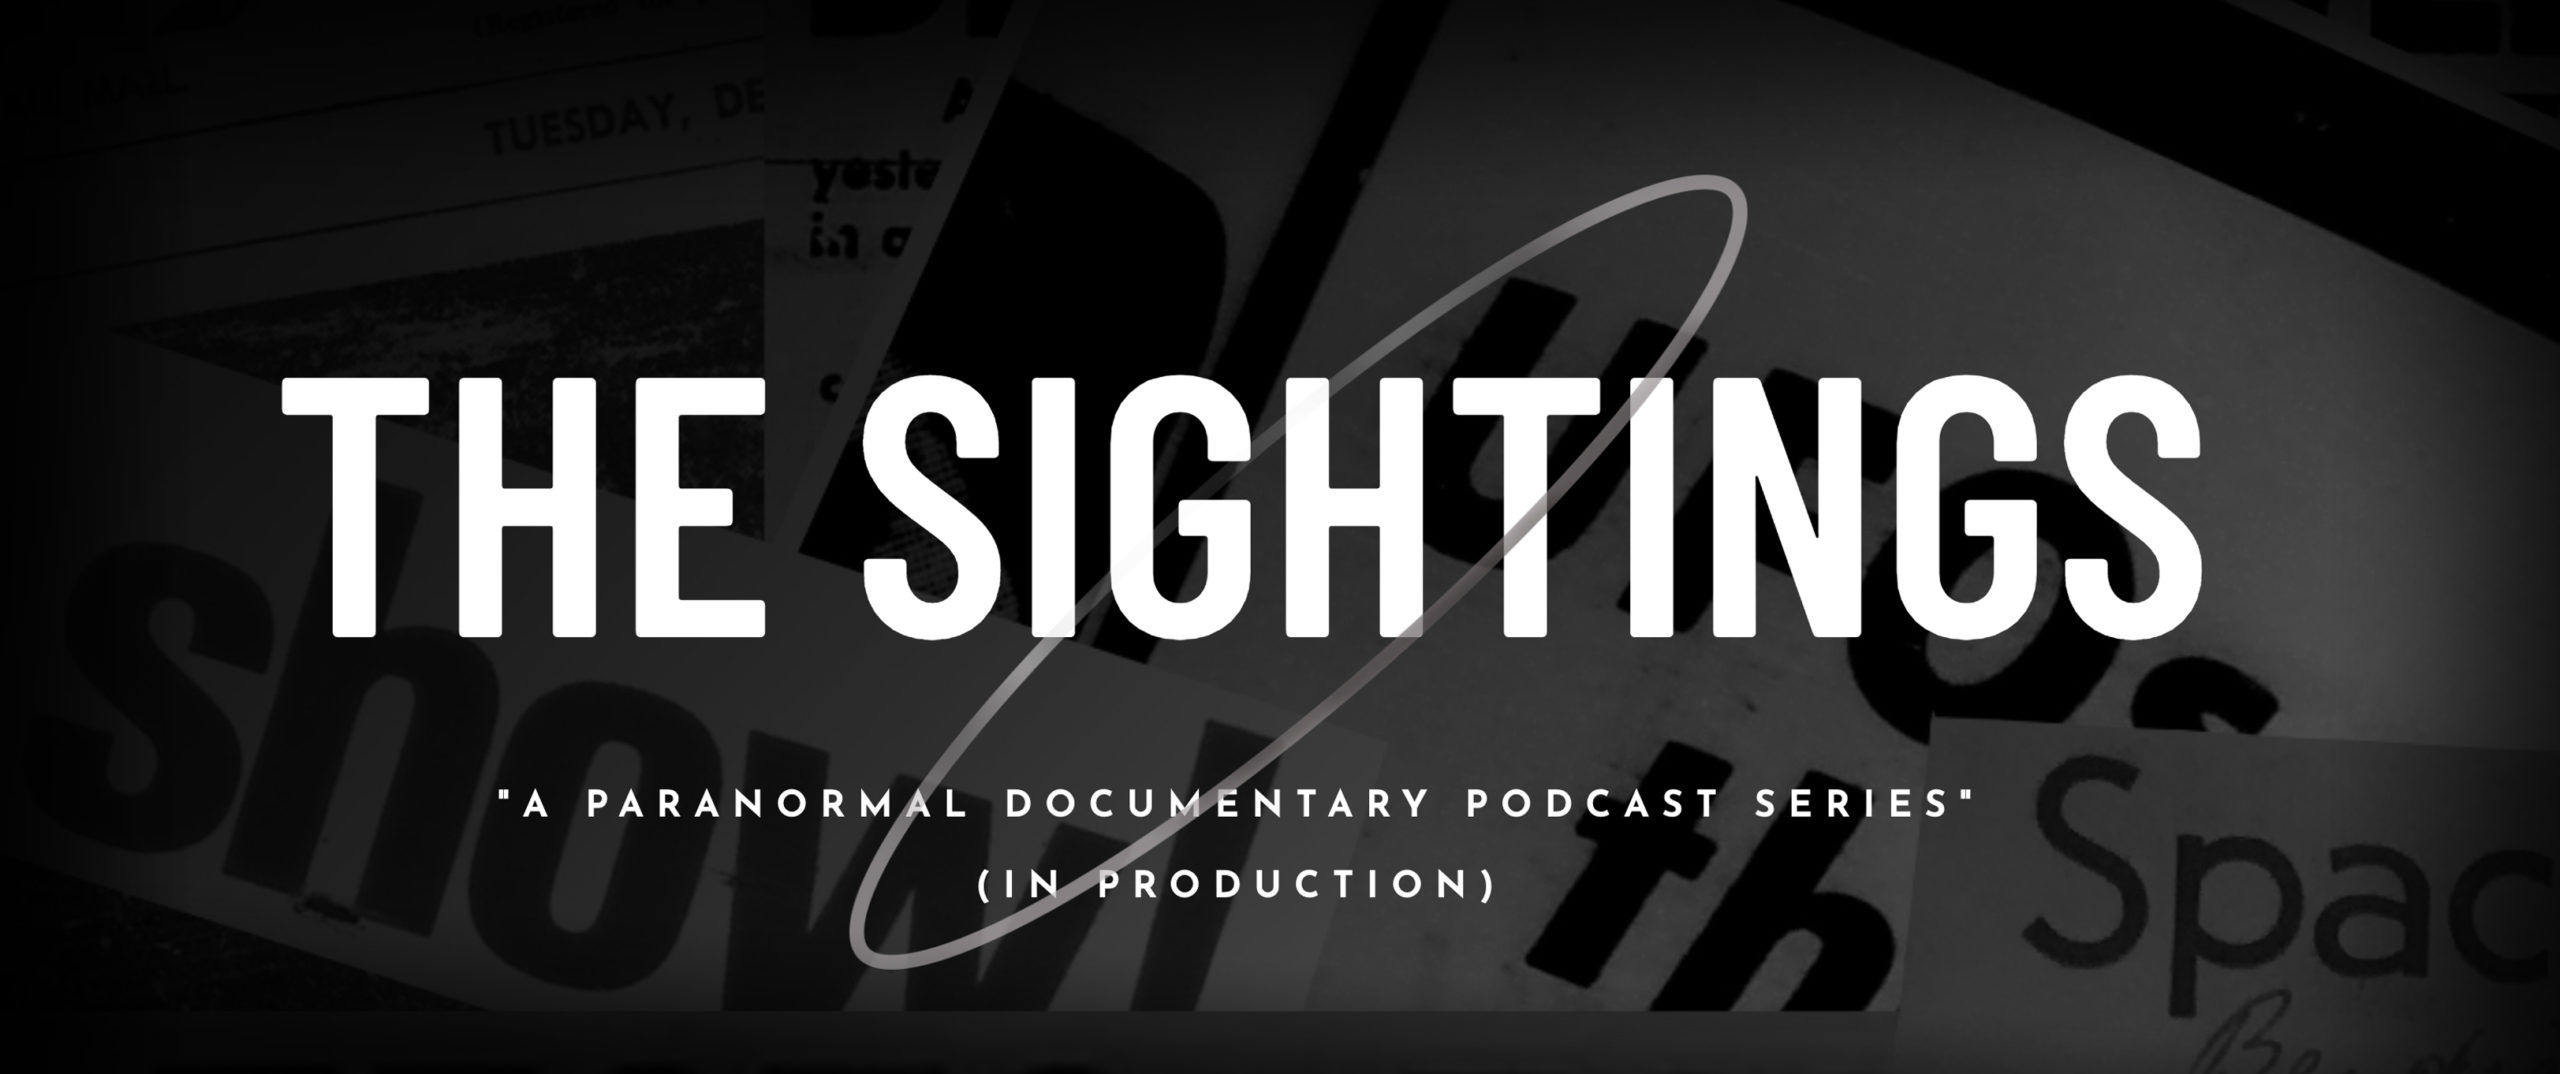 The Sightings Podcast Facebook Banner